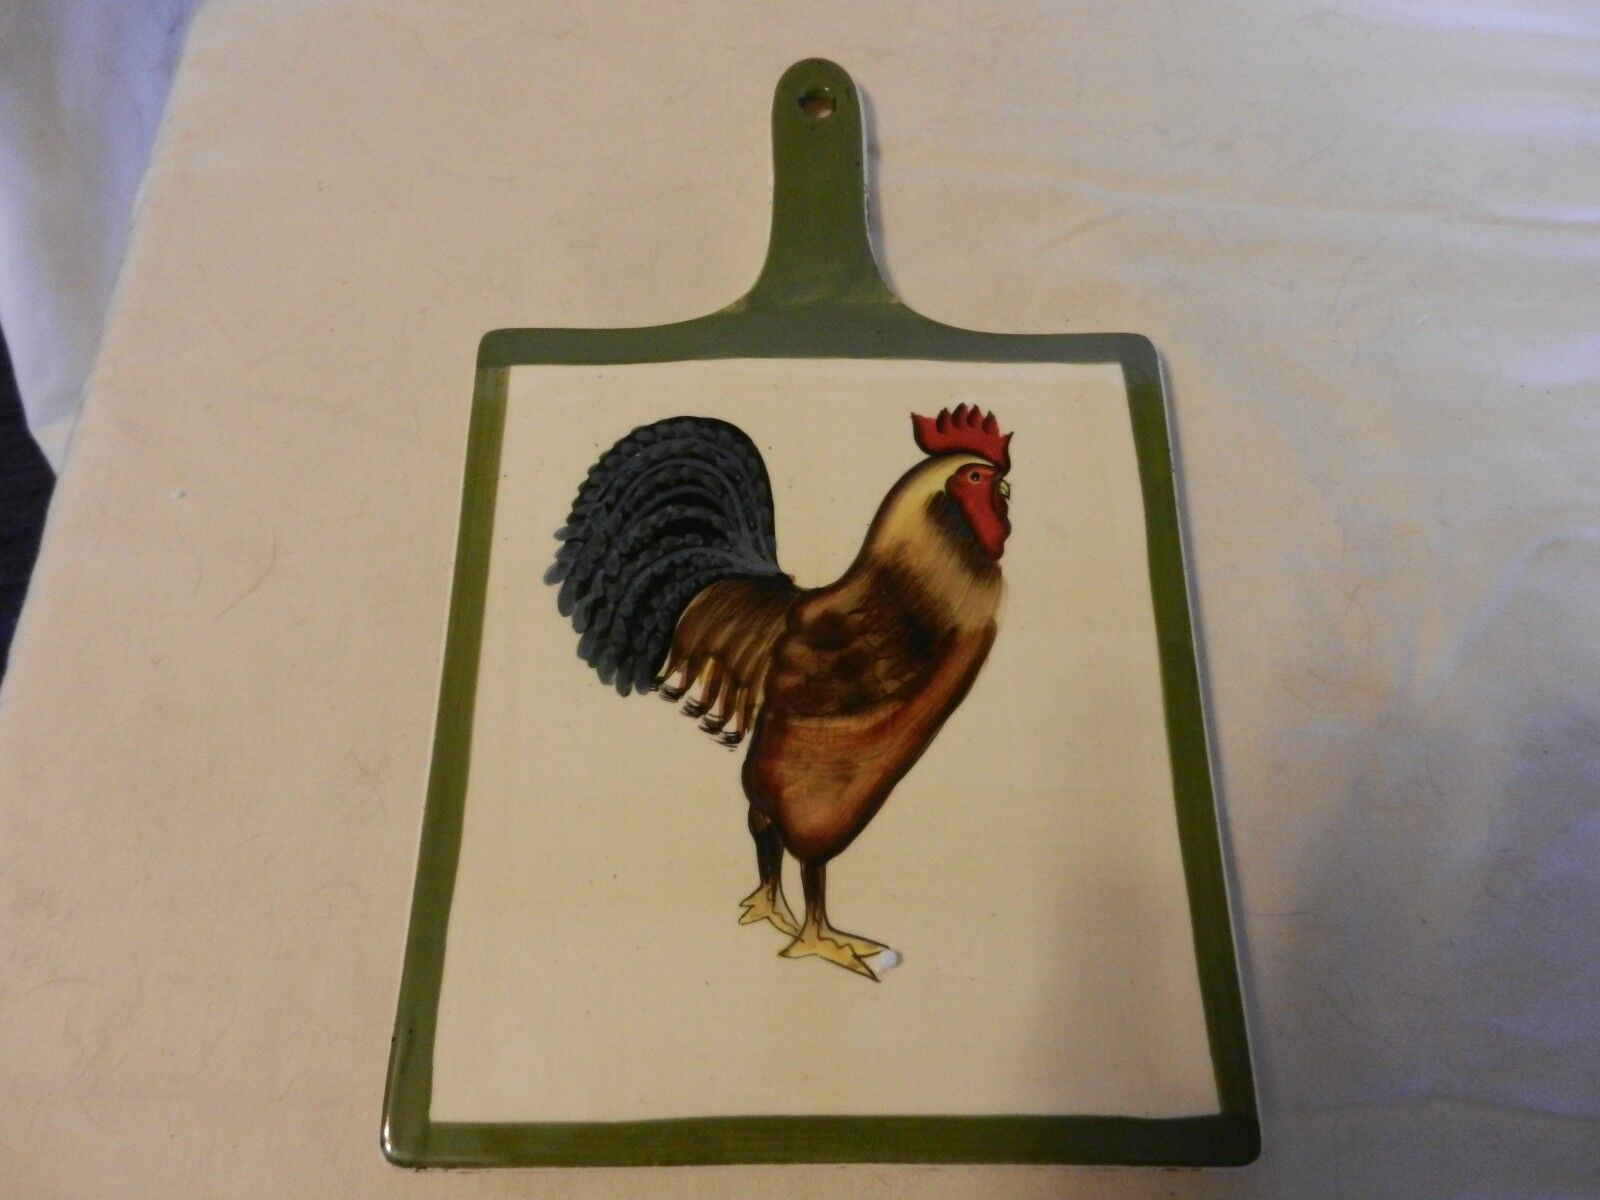 Primary image for Rooster Ceramic Trivet or Wall Hanging from Baum Bros. Rooster Strut Collection